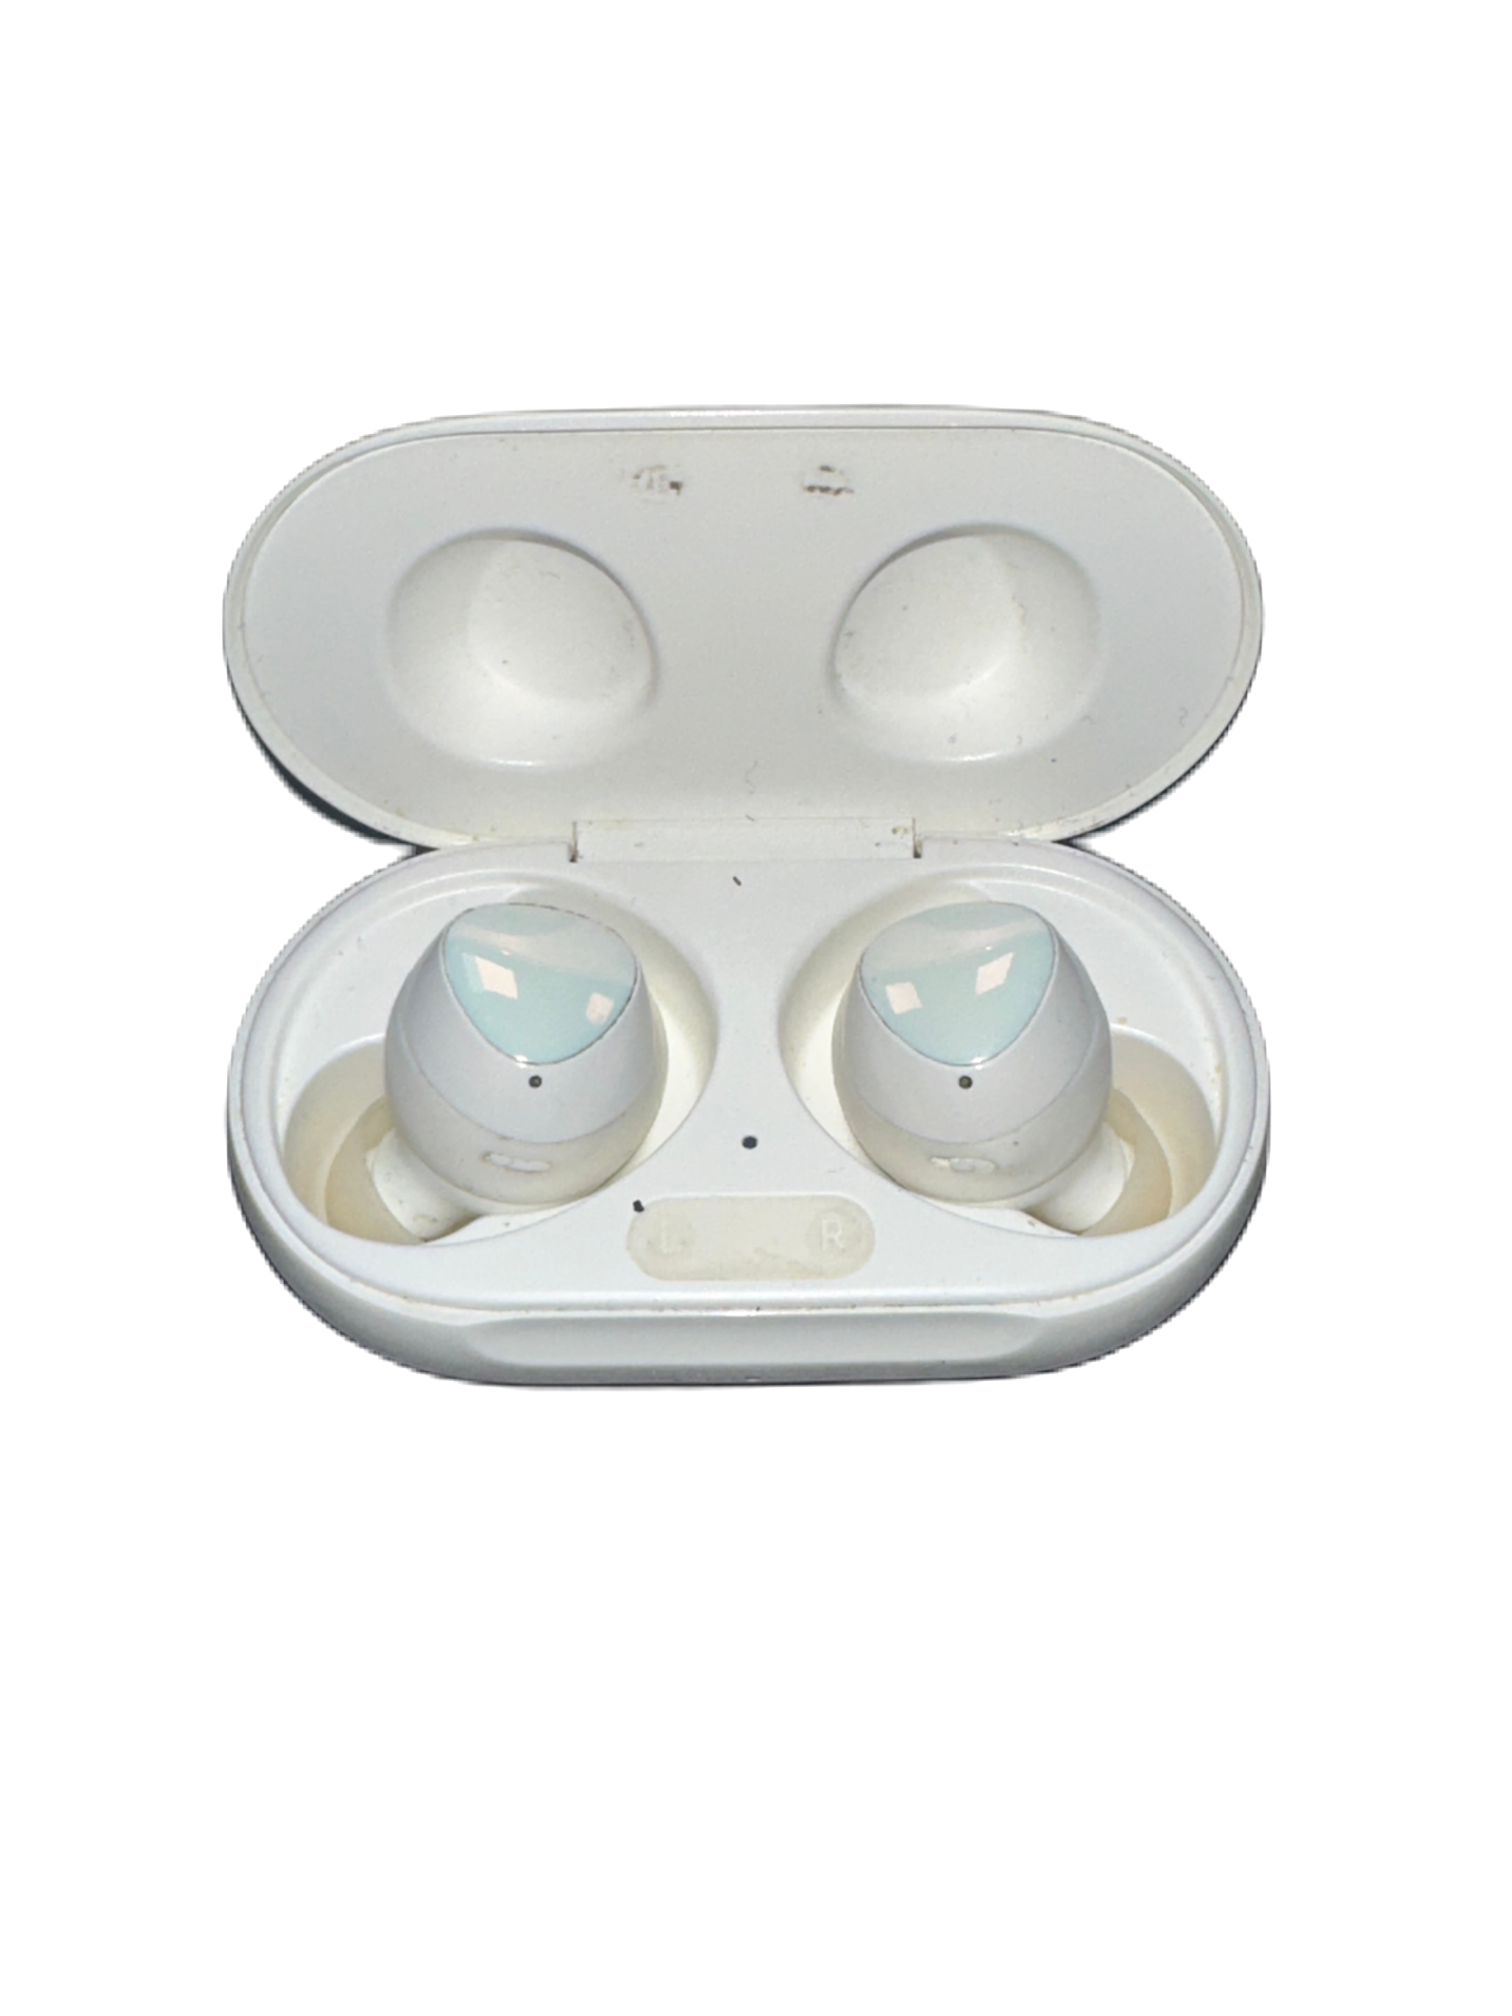 Samsung Galaxy Buds + White, Unboxed